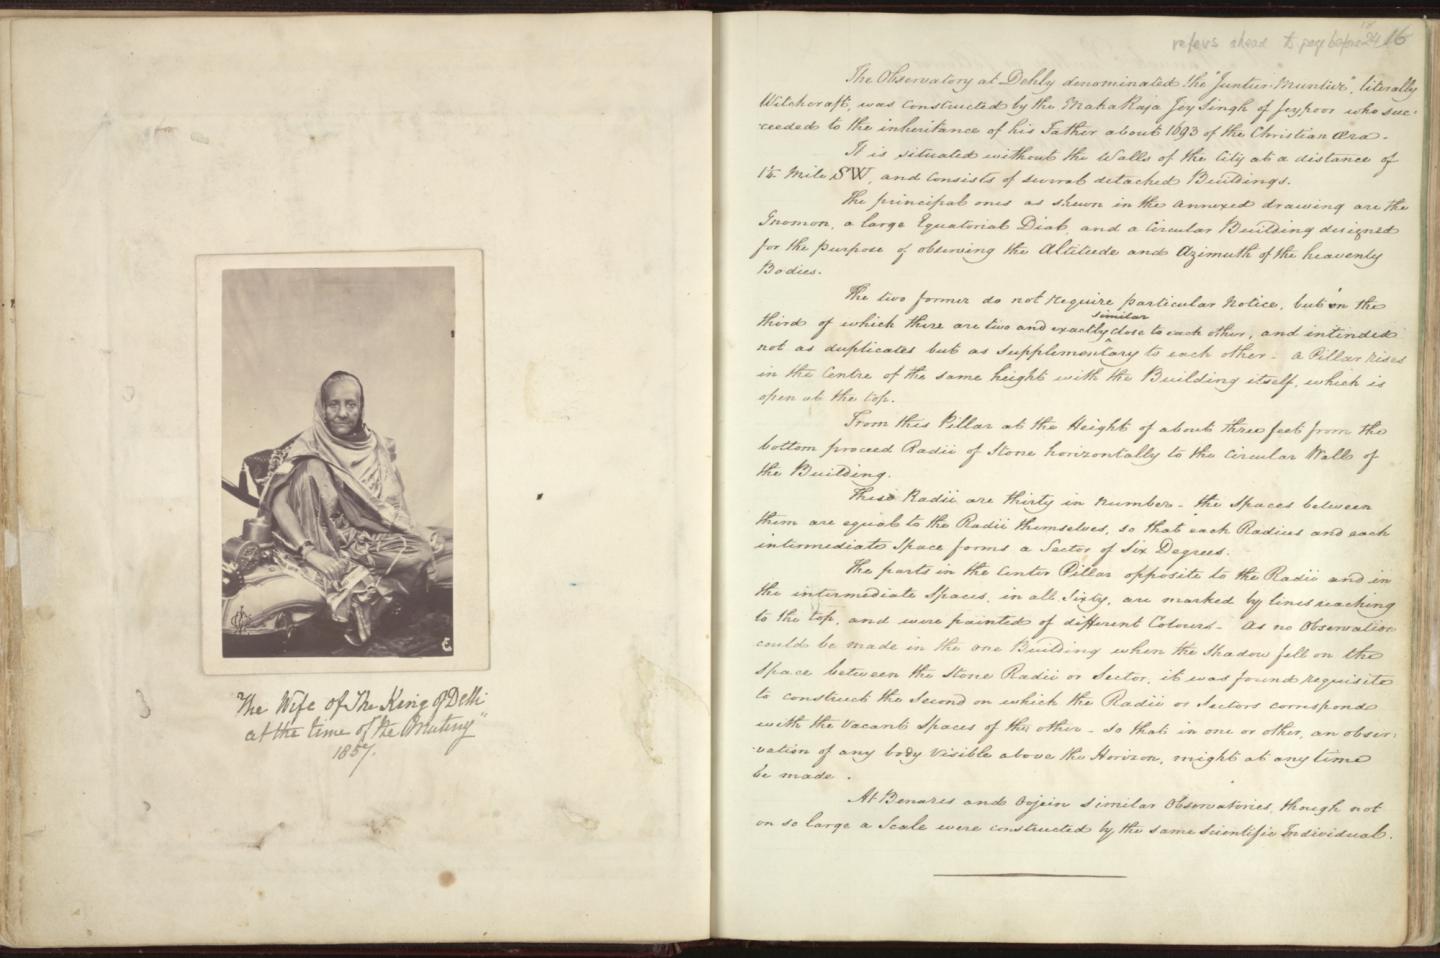 Manuscript spread showing a black and white 19th century photograph of Zeenat Mahal